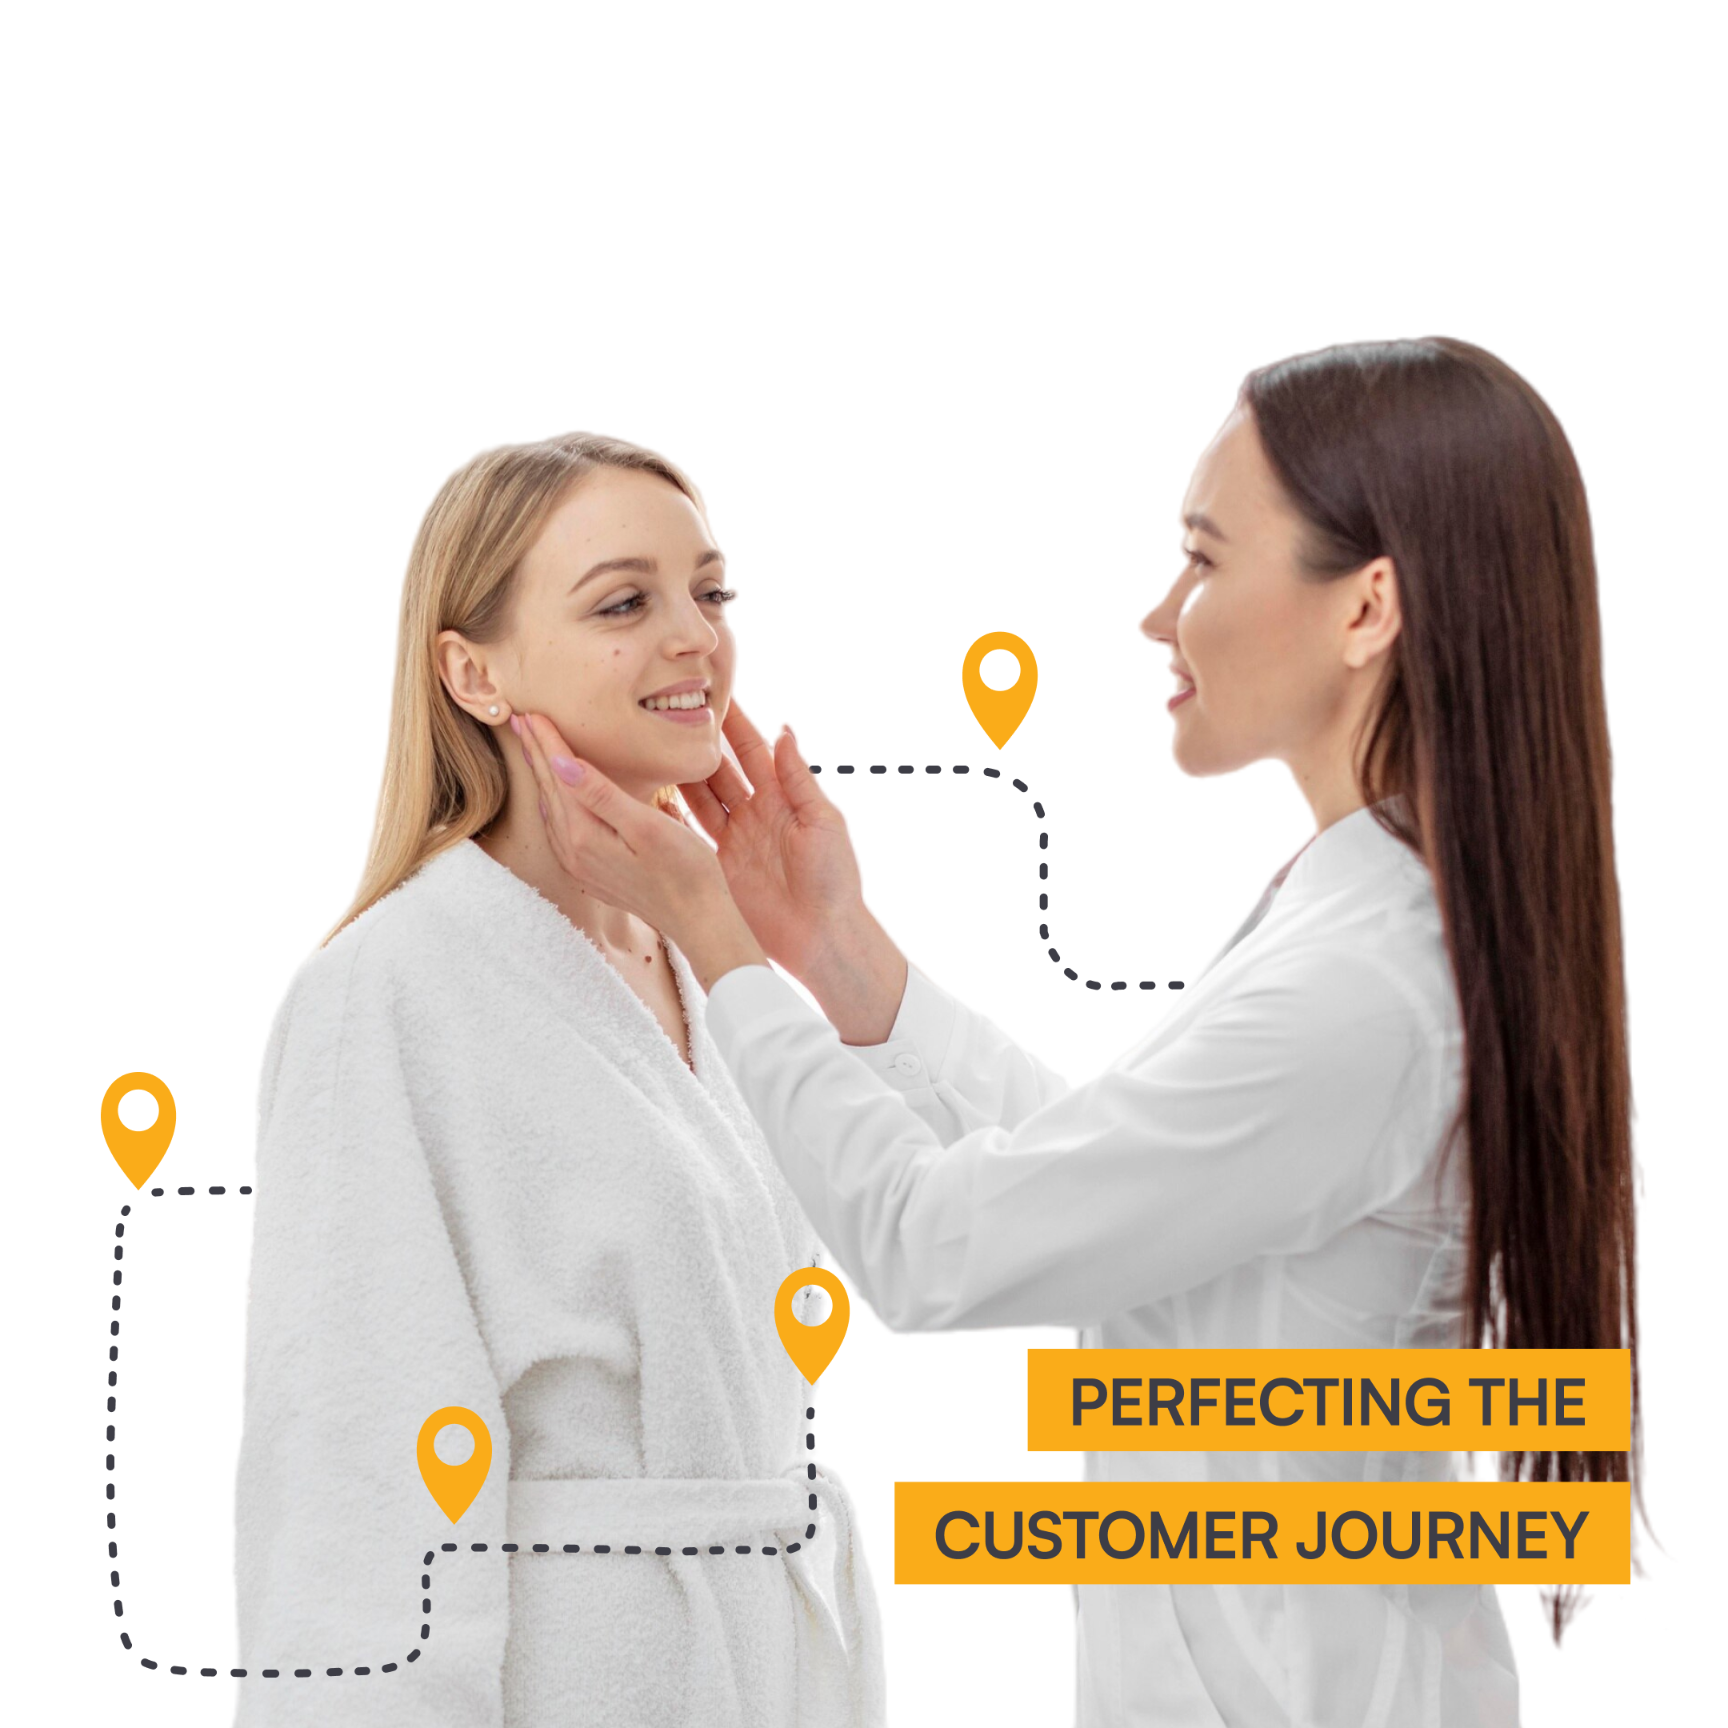 A step-by-step guide to perfecting the customer journey in aesthetics